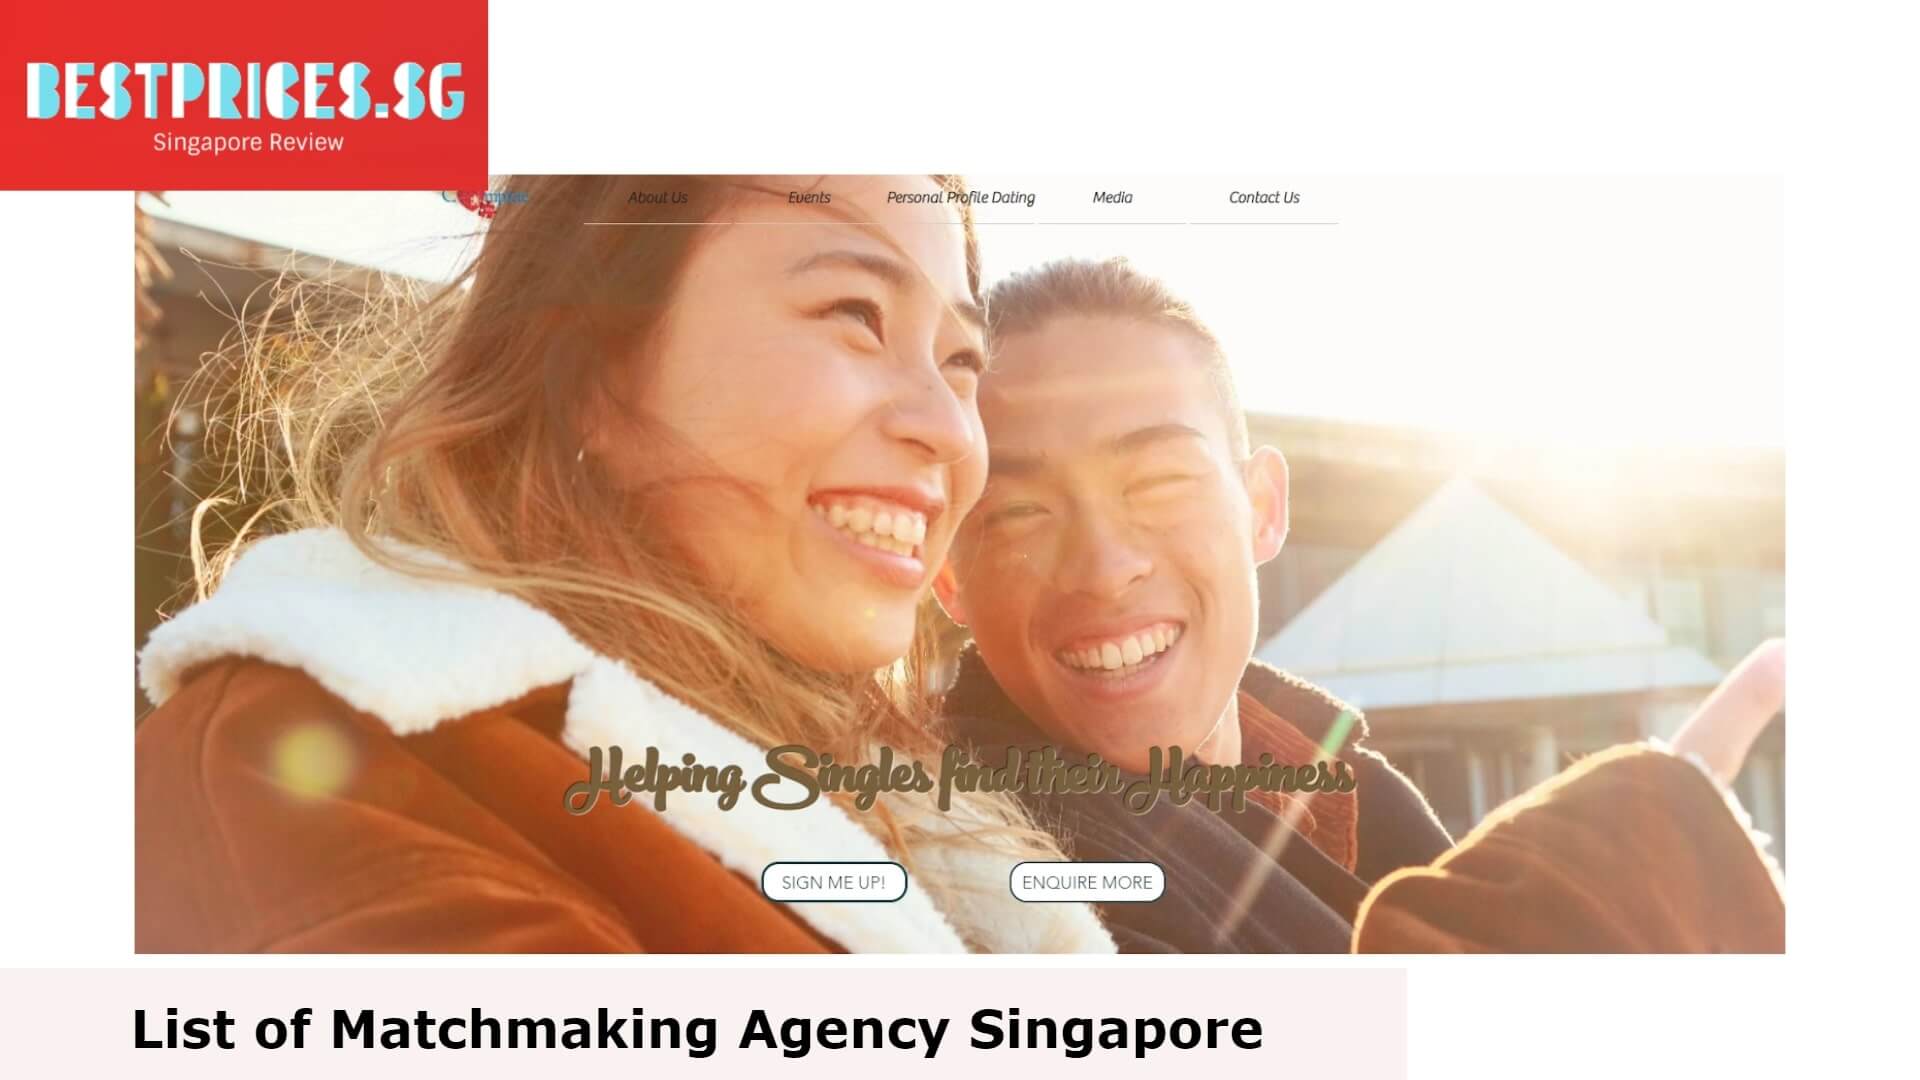 CompleteMe Dating Agency - List of Matchmaking Agency Singapore, singapore government dating agency, Matchmaking services Singapore, Dating Agency Singapore, best matchmaking agency singapore, dating agency singapore review, dating agencies singapore, muslim matchmaking agency singapore, How do I meet Muslim singles?, Are Muslim dating apps Haram?, What is it like dating a Muslim man?, How much does a dating agency cost?, How do I meet singles in Singapore?, How much does ambiance matchmaking cost?, Are matchmaking services worth it?, Singapore Best Dating Site, indian matchmaking agency singapore, thai matchmaking agency in singapore, marriage agency singapore, dating agency singapore price, professional matchmaker singapore, 